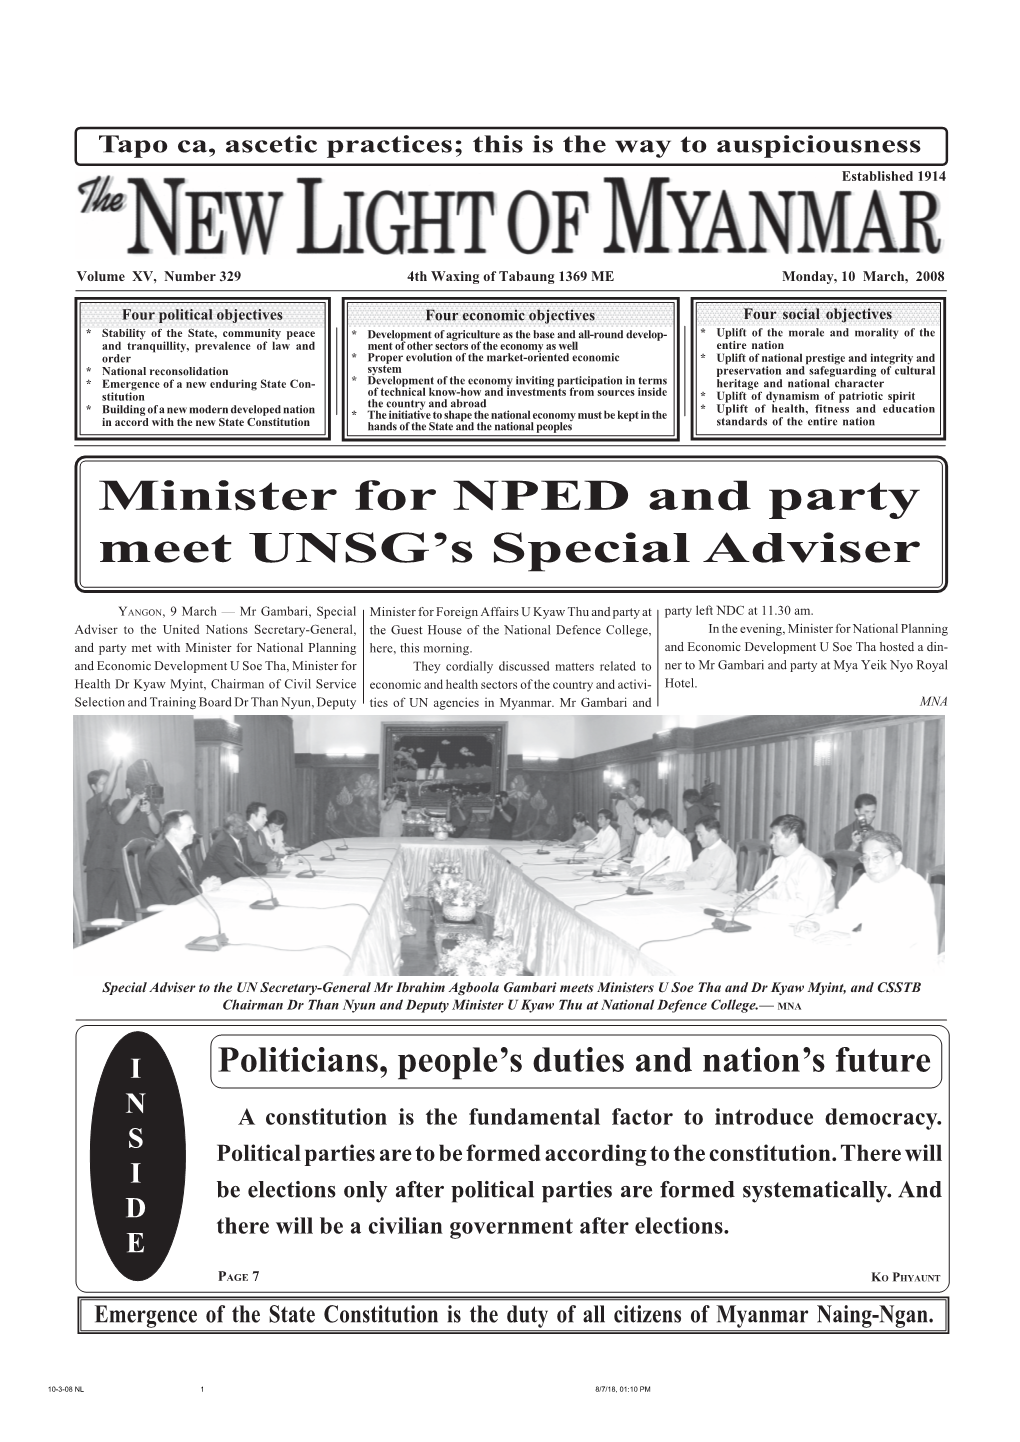 Minister for NPED and Party Meet UNSG's Special Adviser